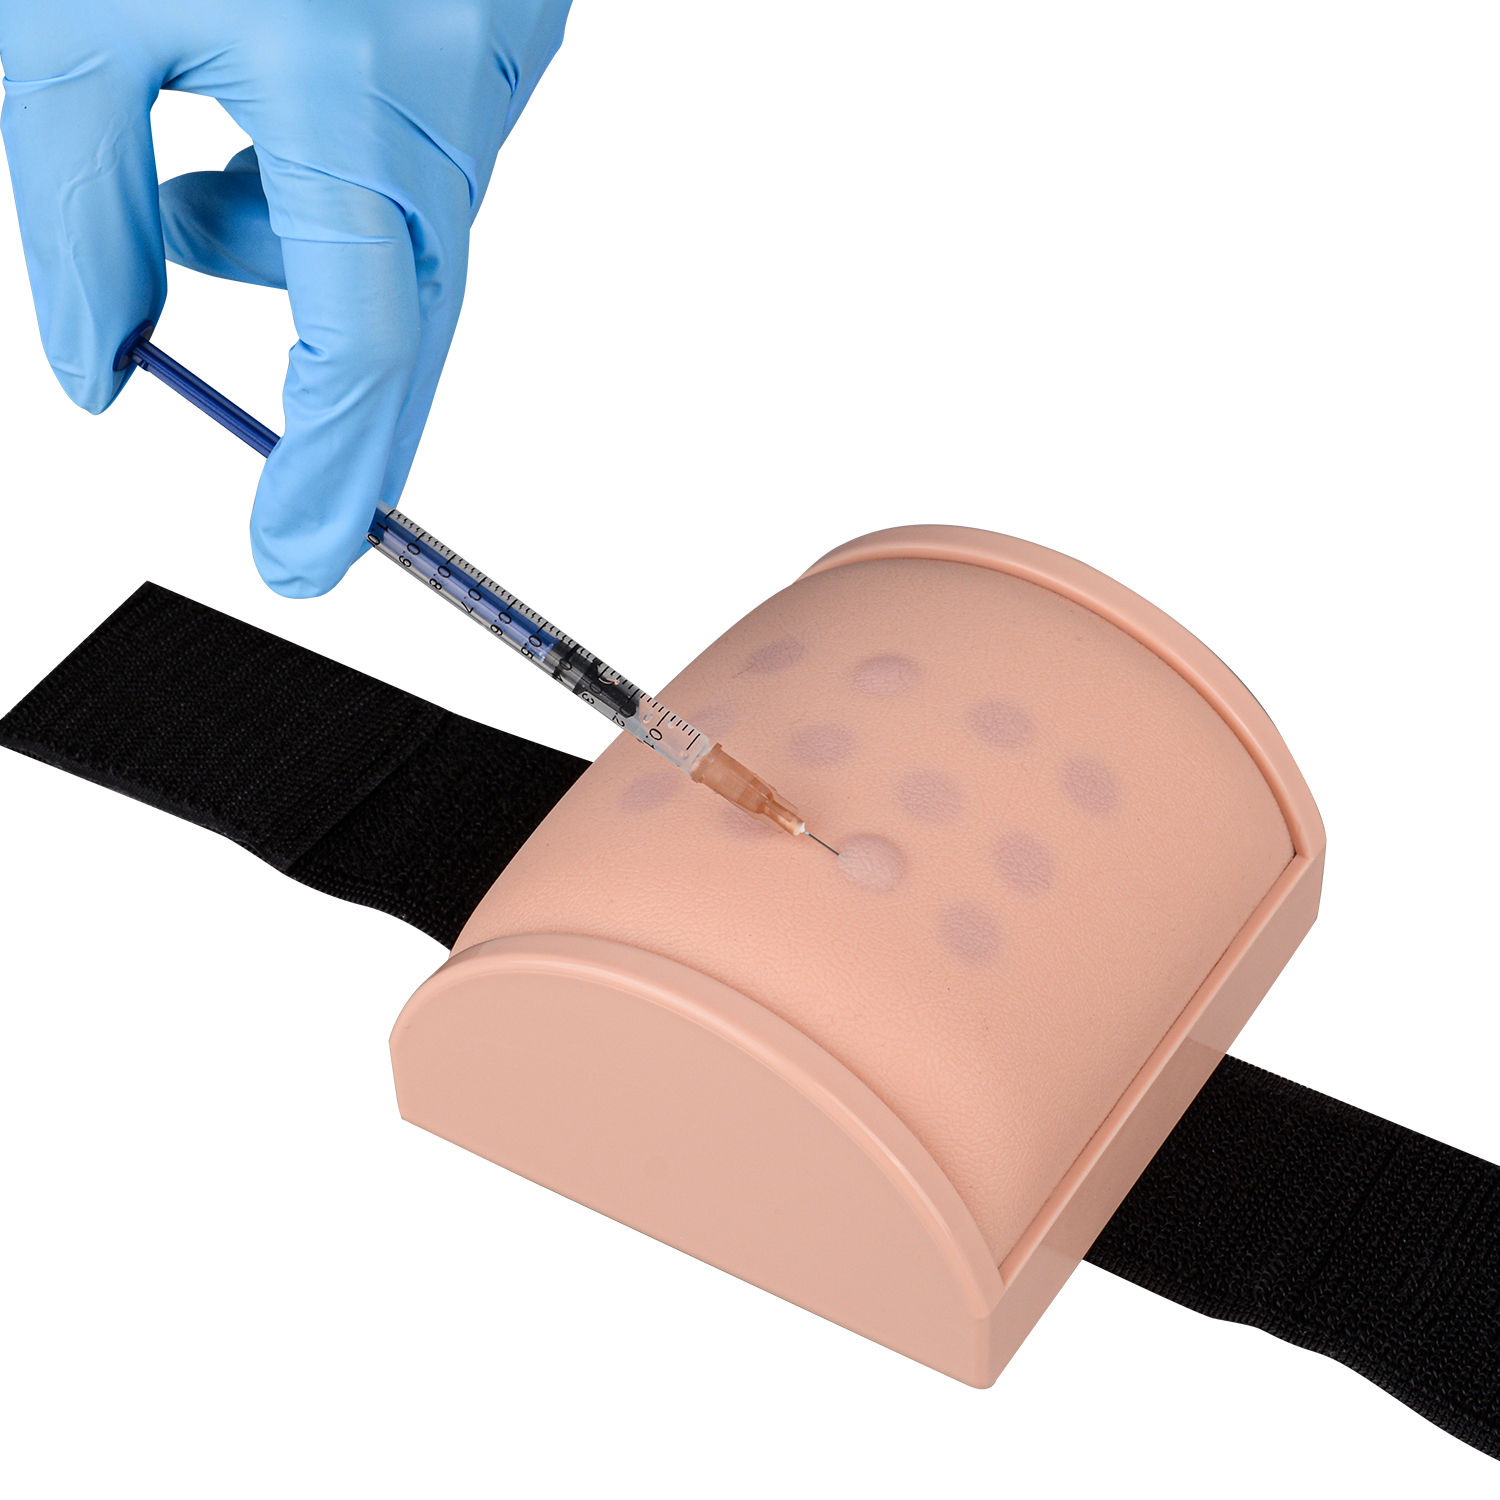 IM ID SQ Injection Practice Kit, Detachable, Wearable, ID Spots Customized